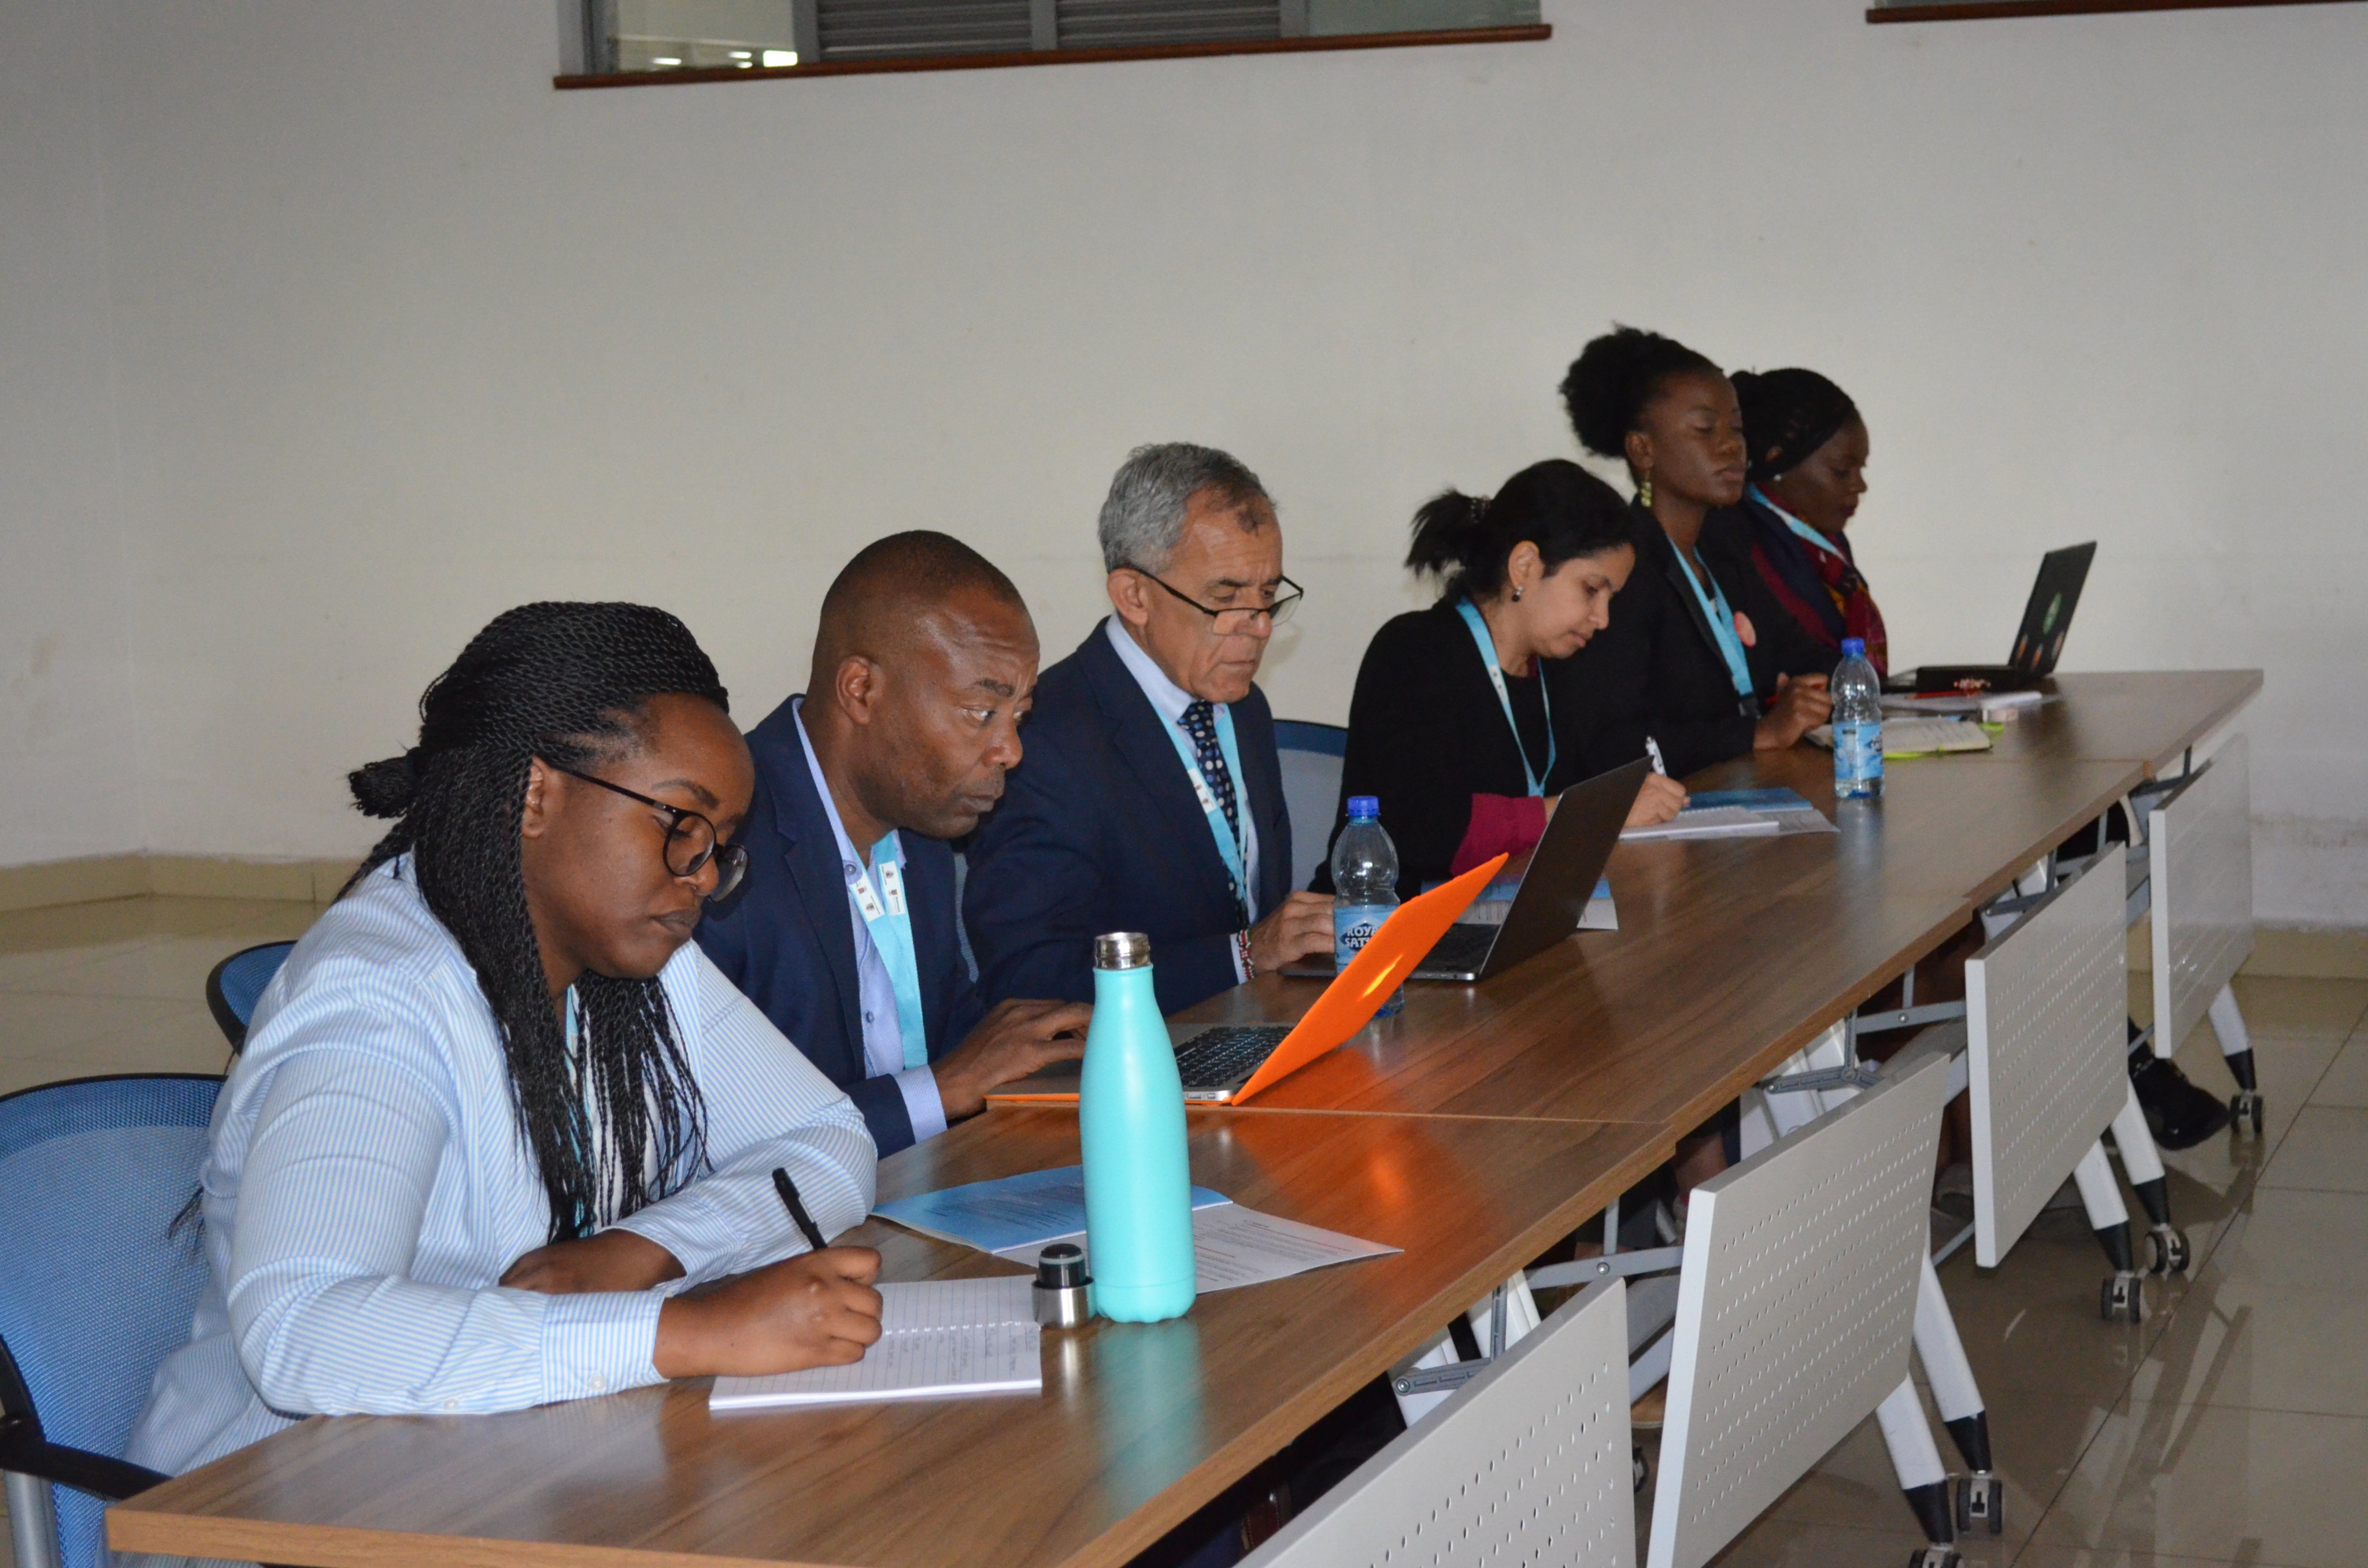 Delegates and speakers during the 3rd symposium on Climate Change Adaption in Africa 24th Jan 2020